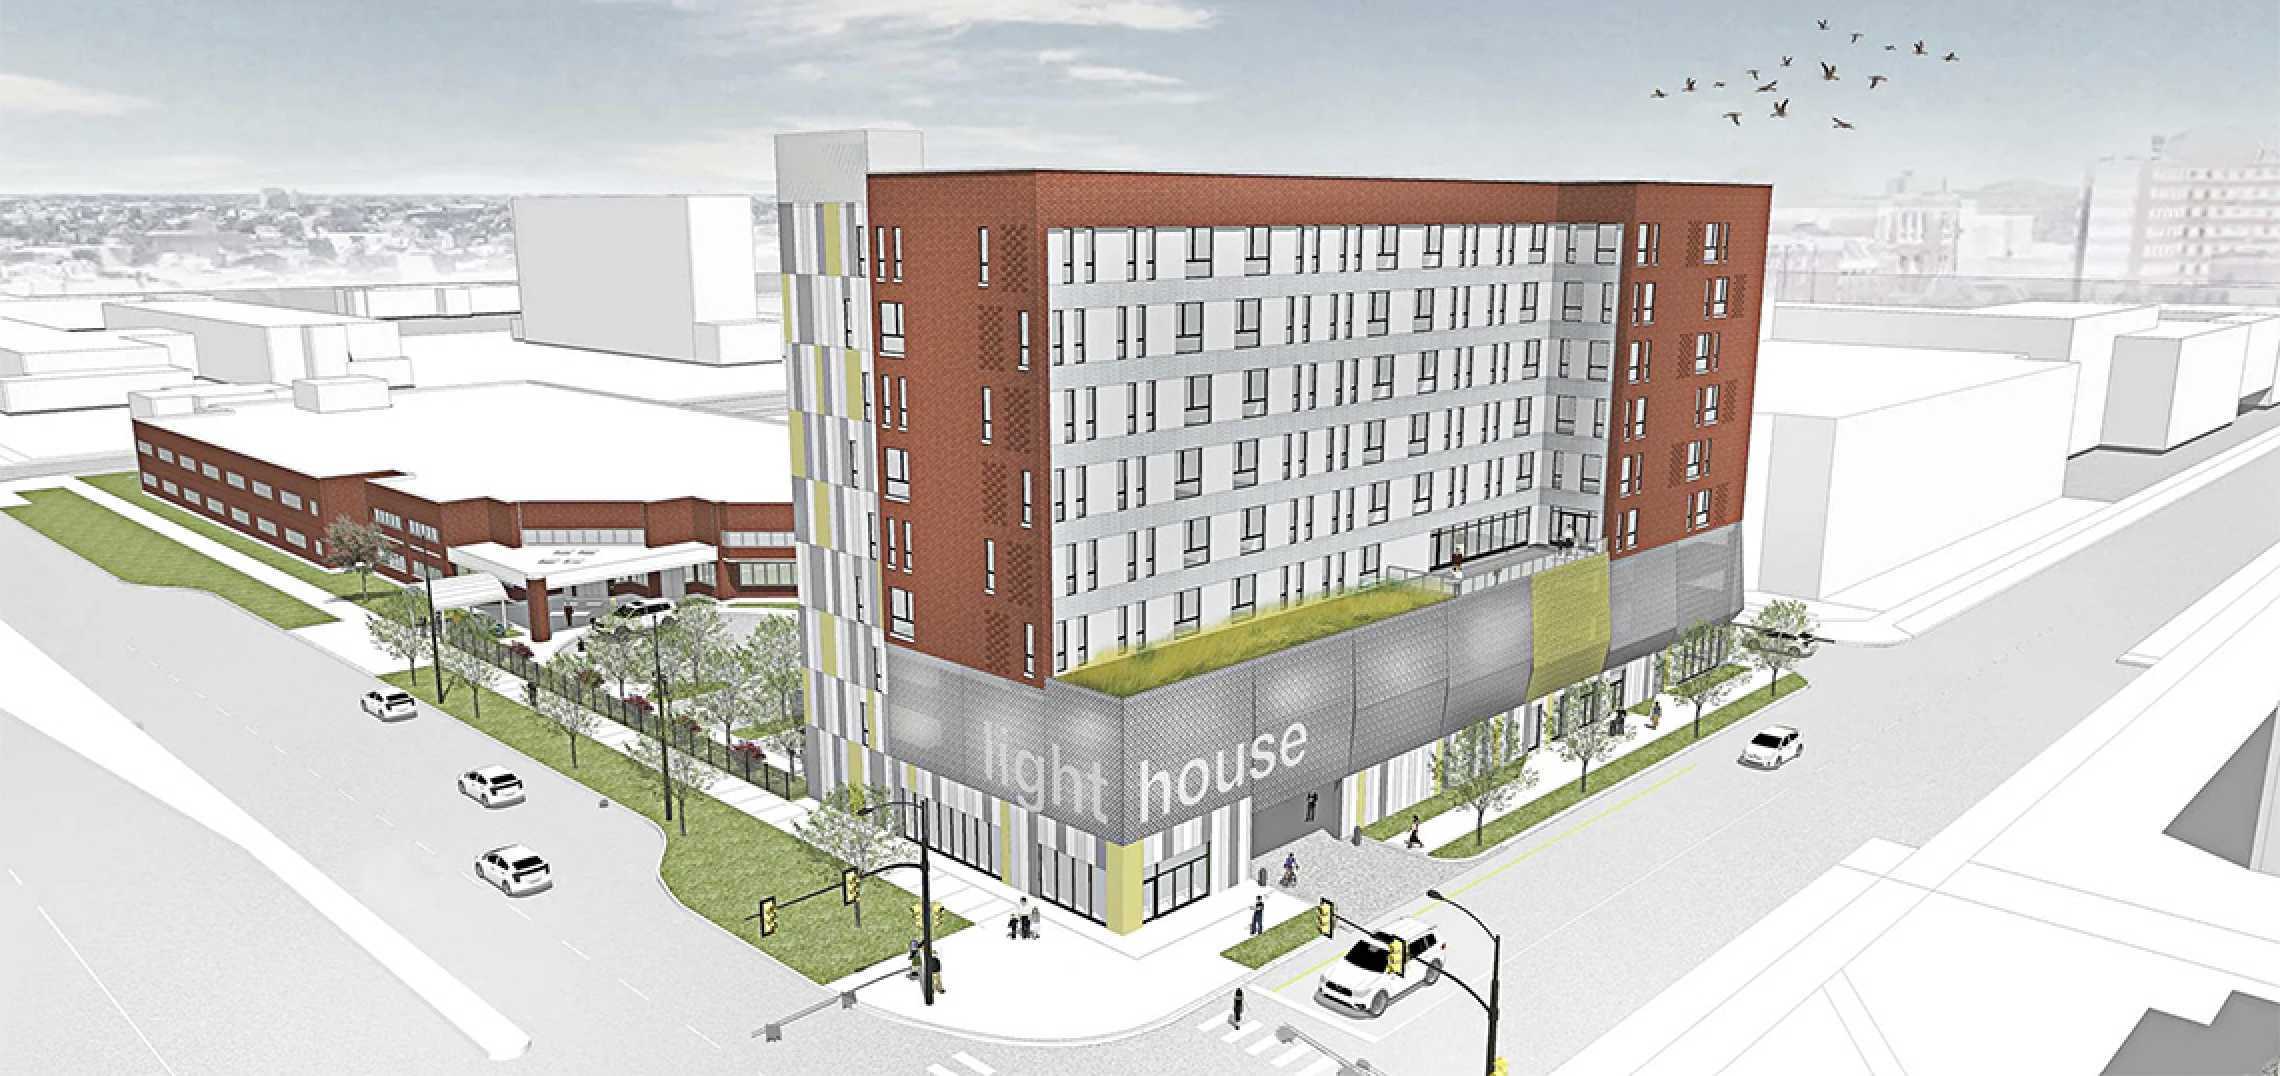 Urbanize Chicago: Foundation permits issued for 1134 S. Wood